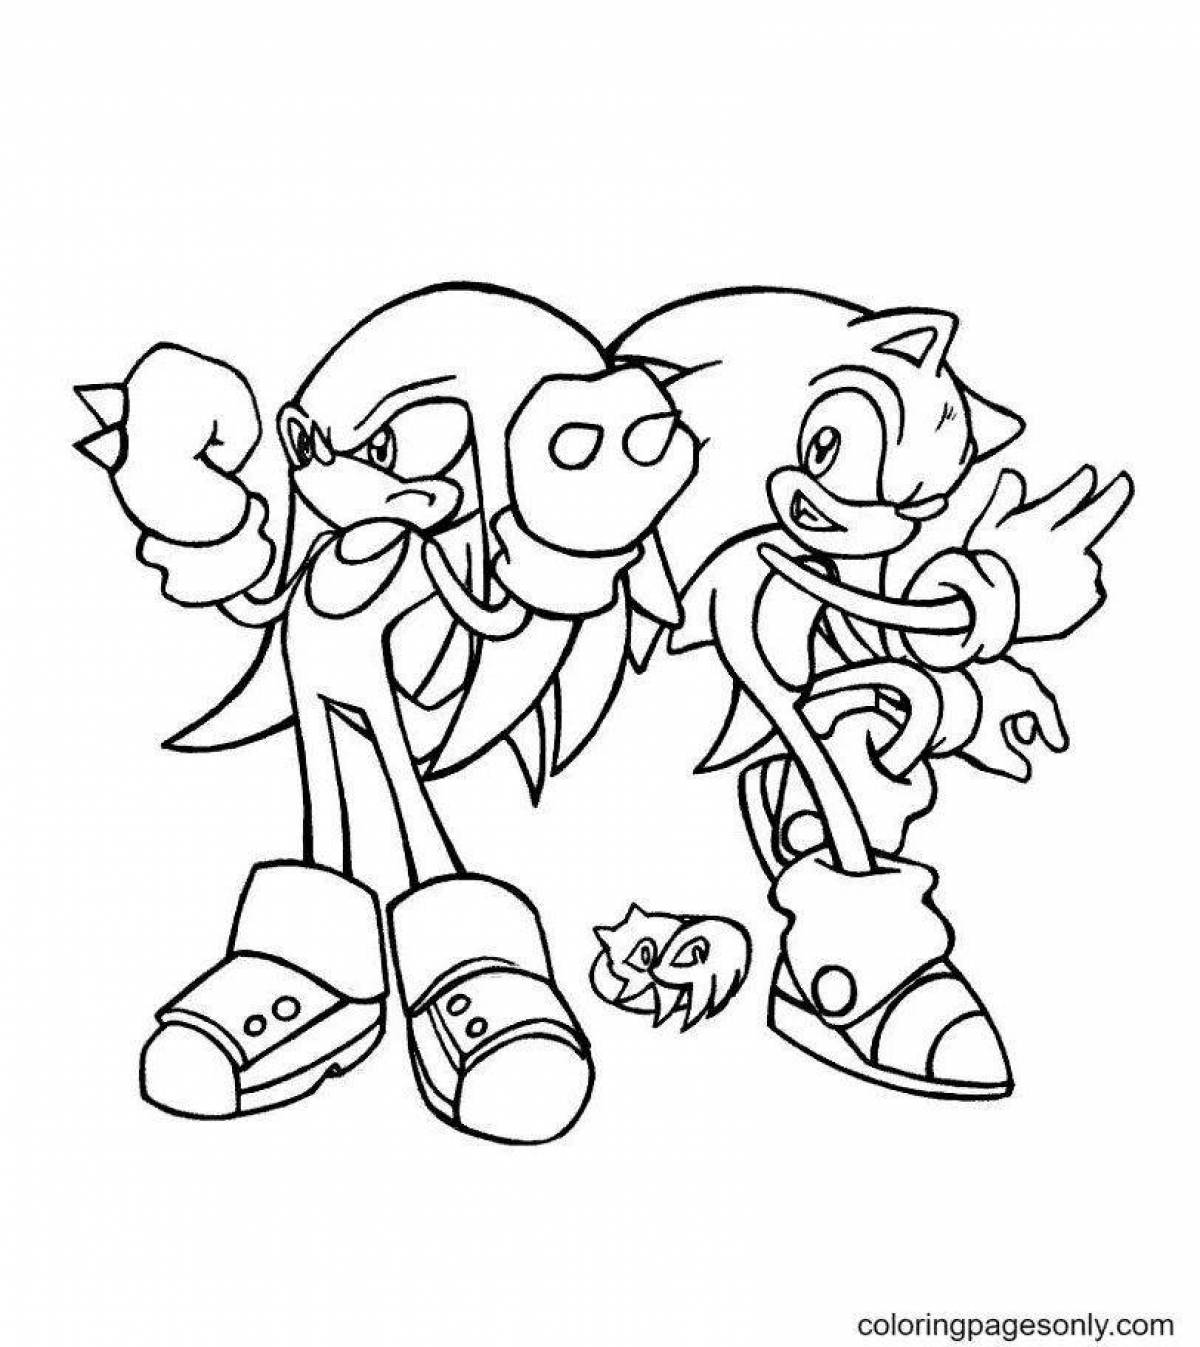 Colorful sonic knuckles coloring book